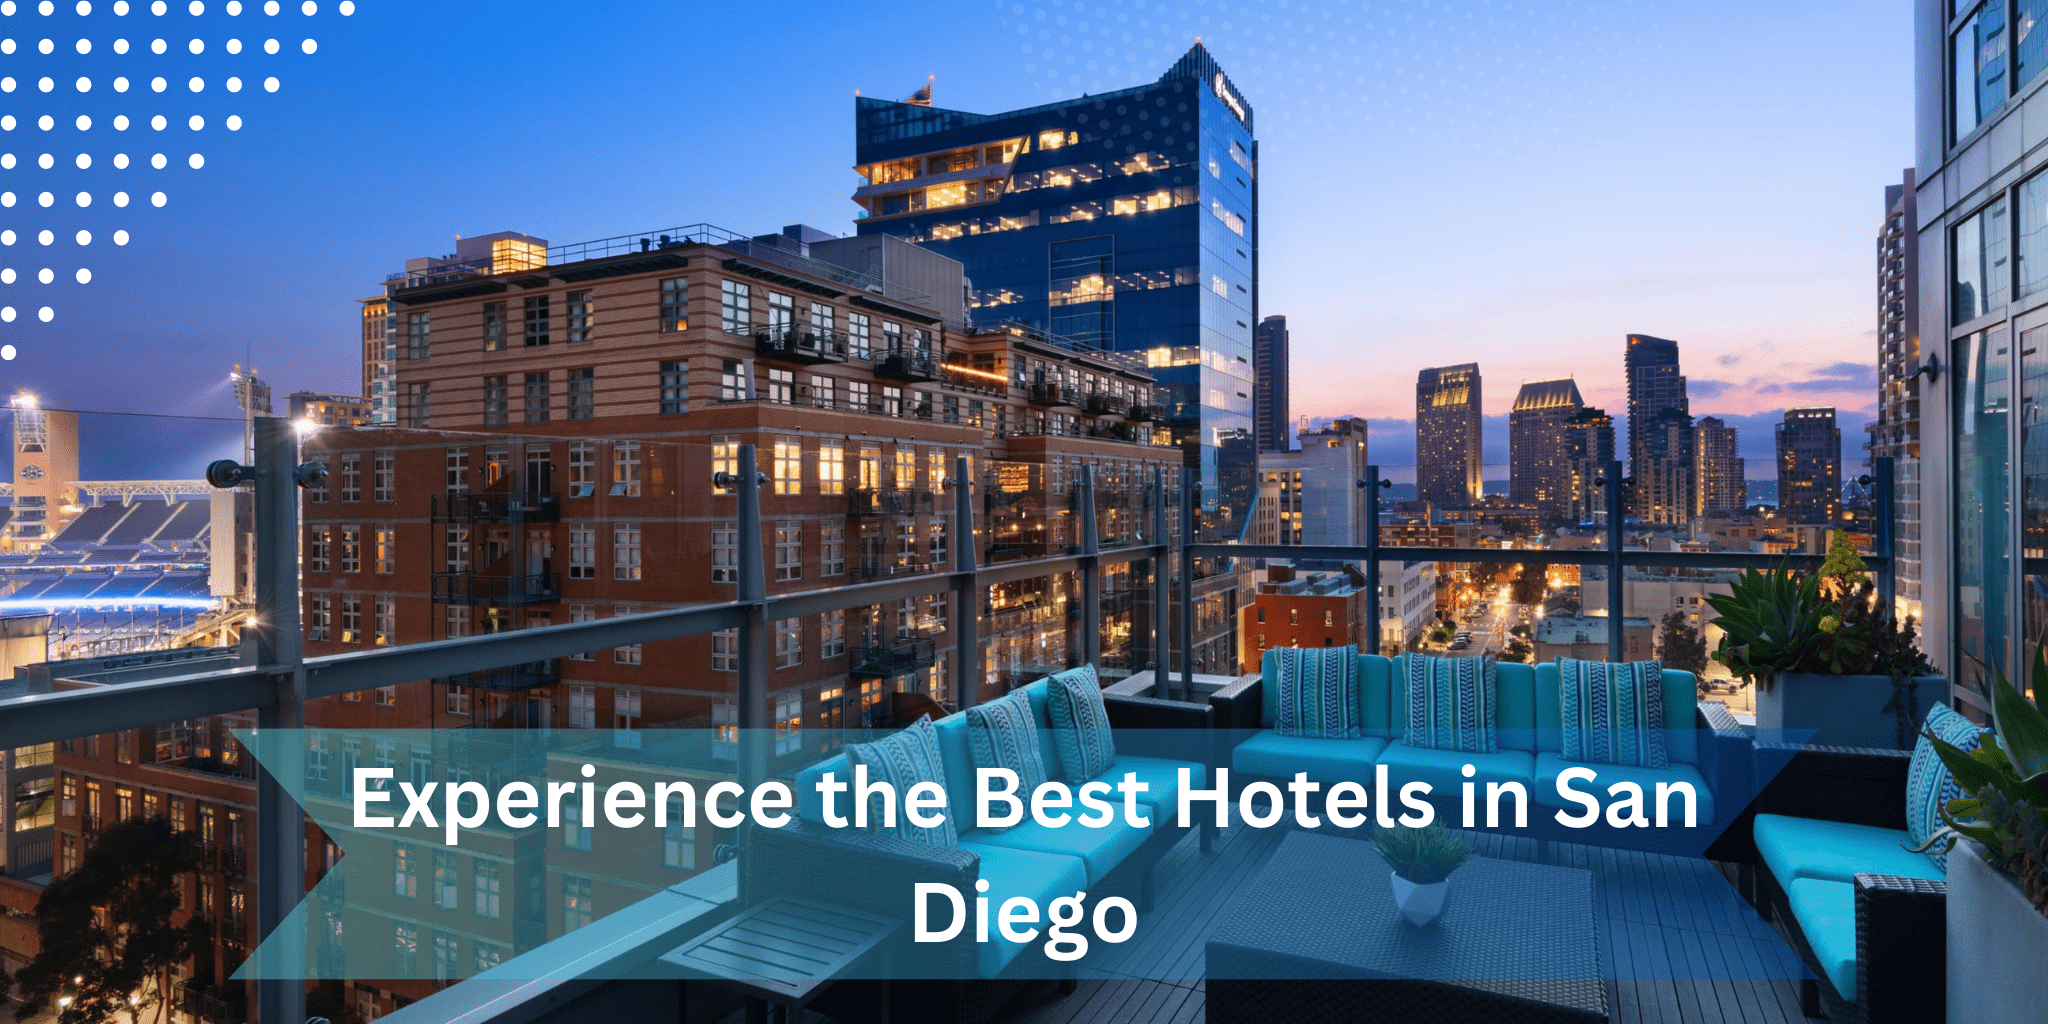 The Ultimate Retreat: Experience the Best Hotels in San Diego